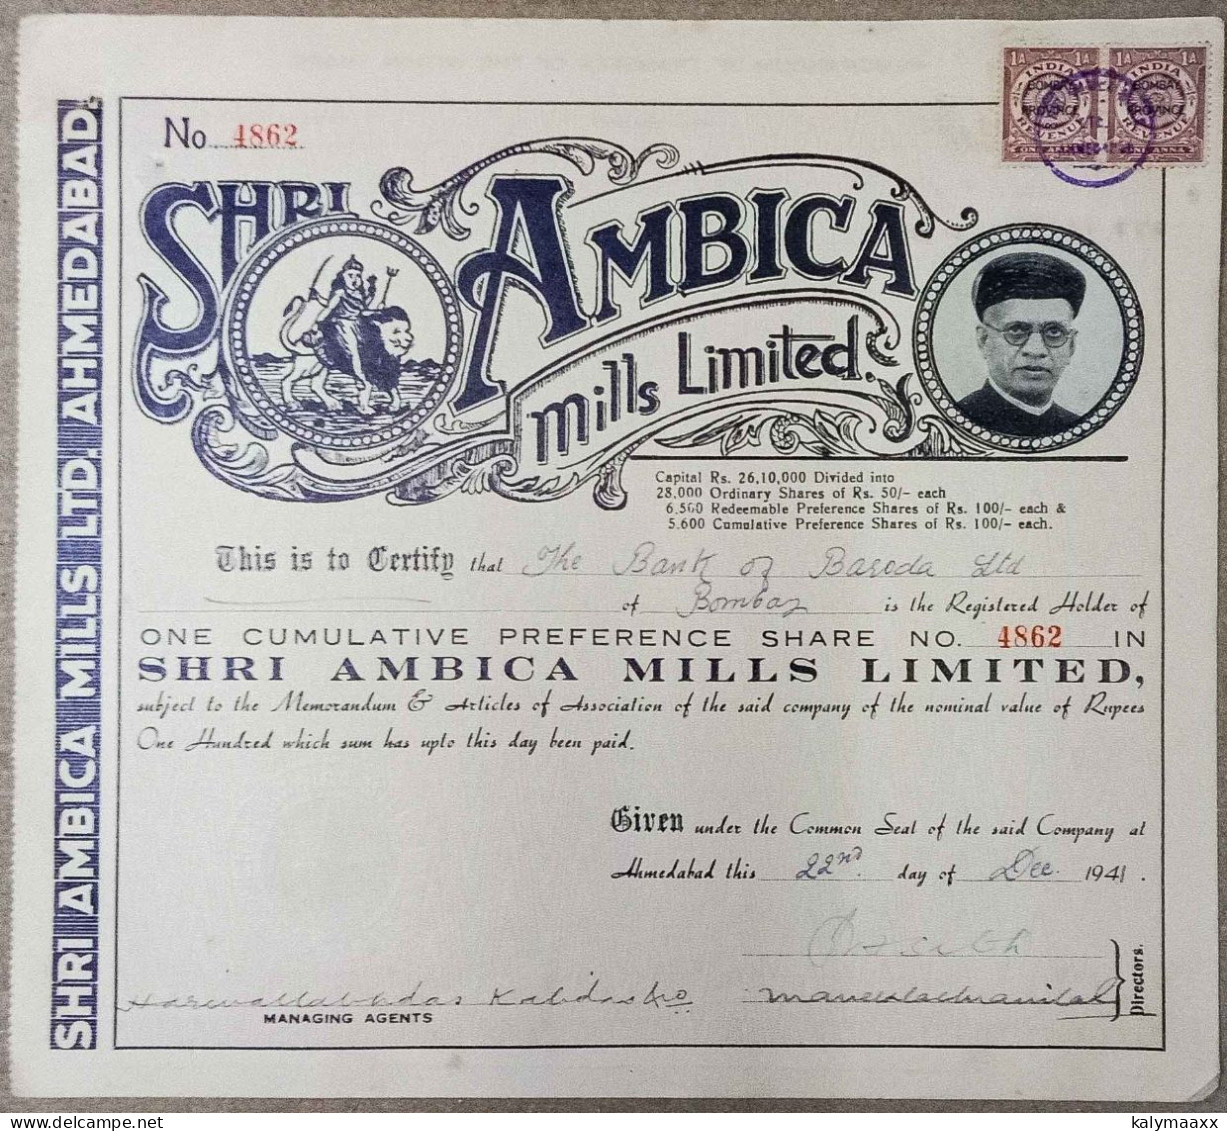 INDIA 1941 SHRI AMBICA MILLS LIMITED, TEXTILE, SPINNING, WEAVING.....SHARE CERTIFICATE - Textiel